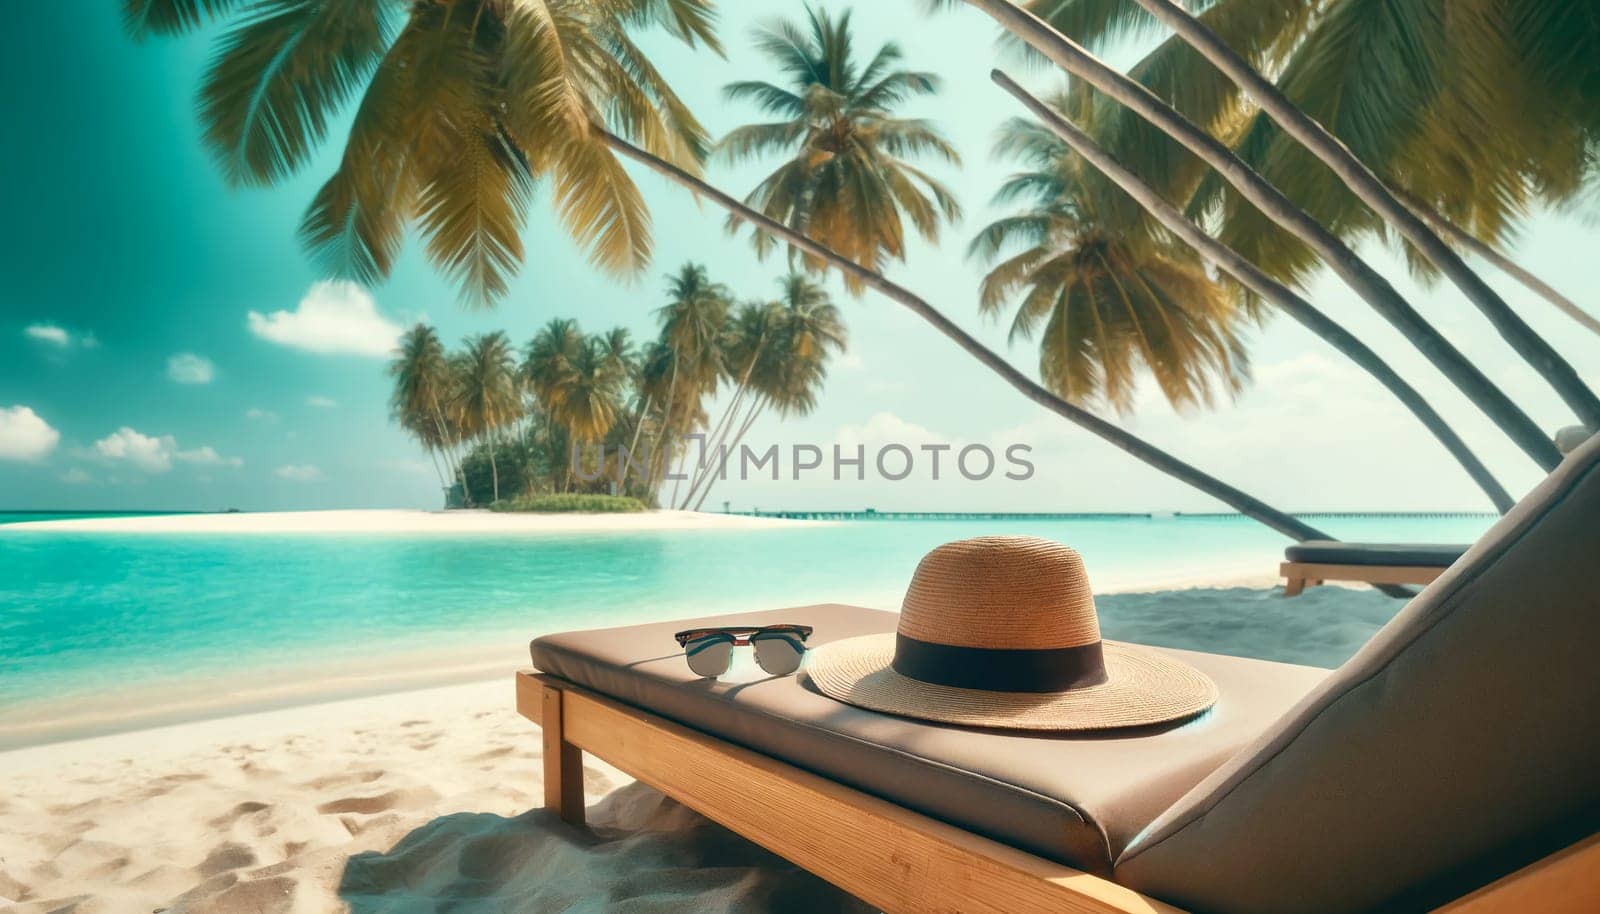 straw hat and sunglasses on a sun lounger under palm trees on a sunny ocean beach.